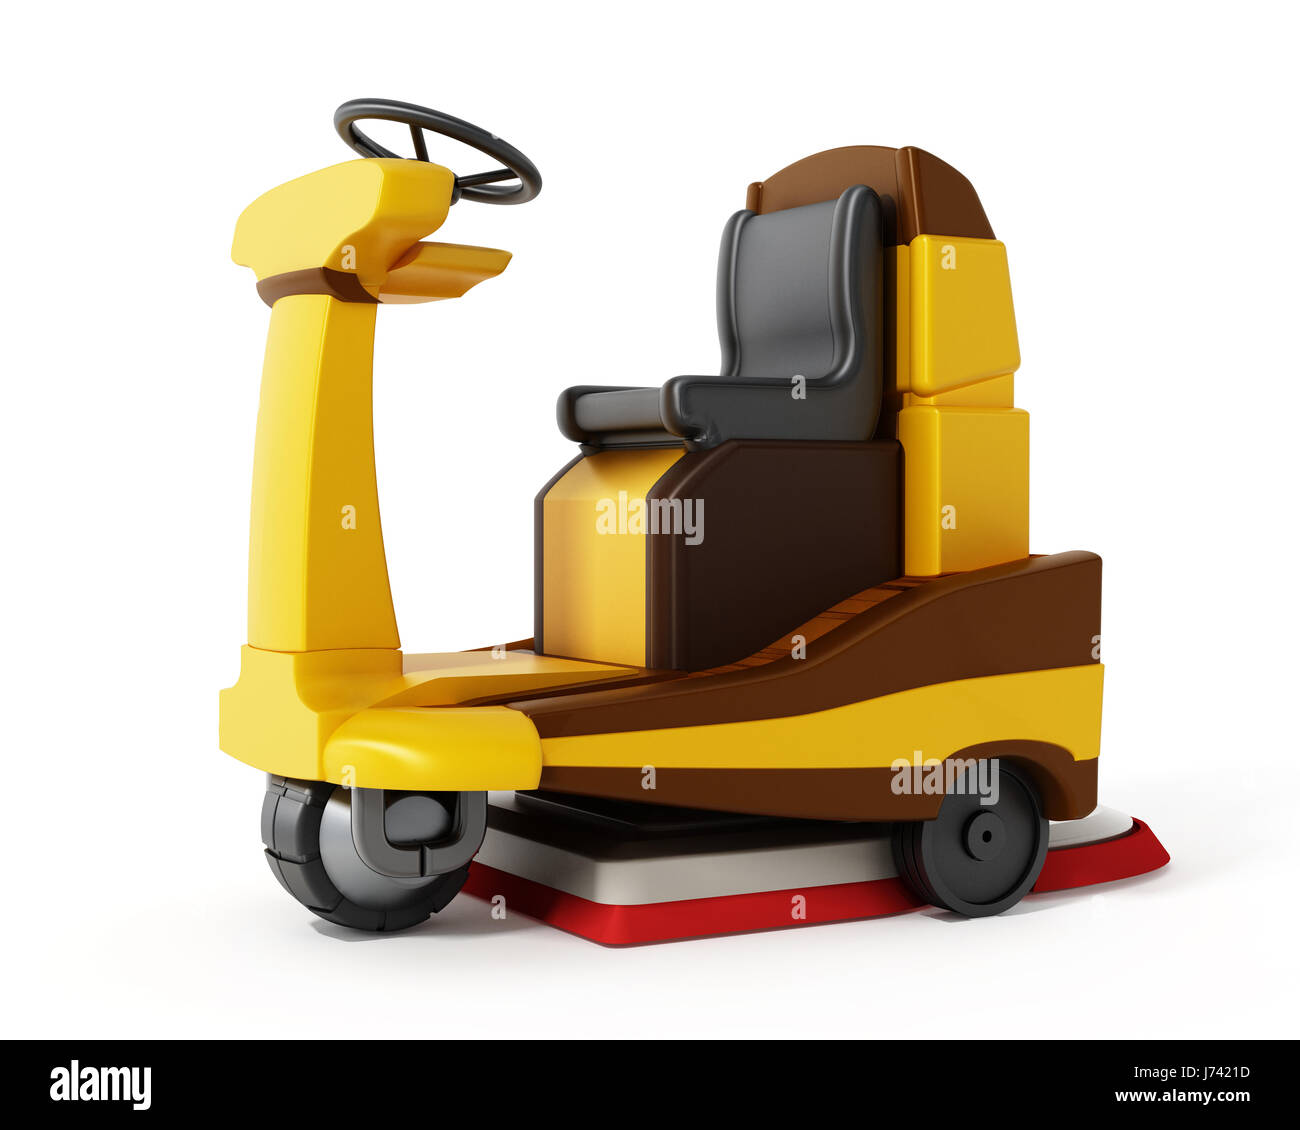 Floor cleaning machine isolated on white background. 3D illustration. Stock Photo